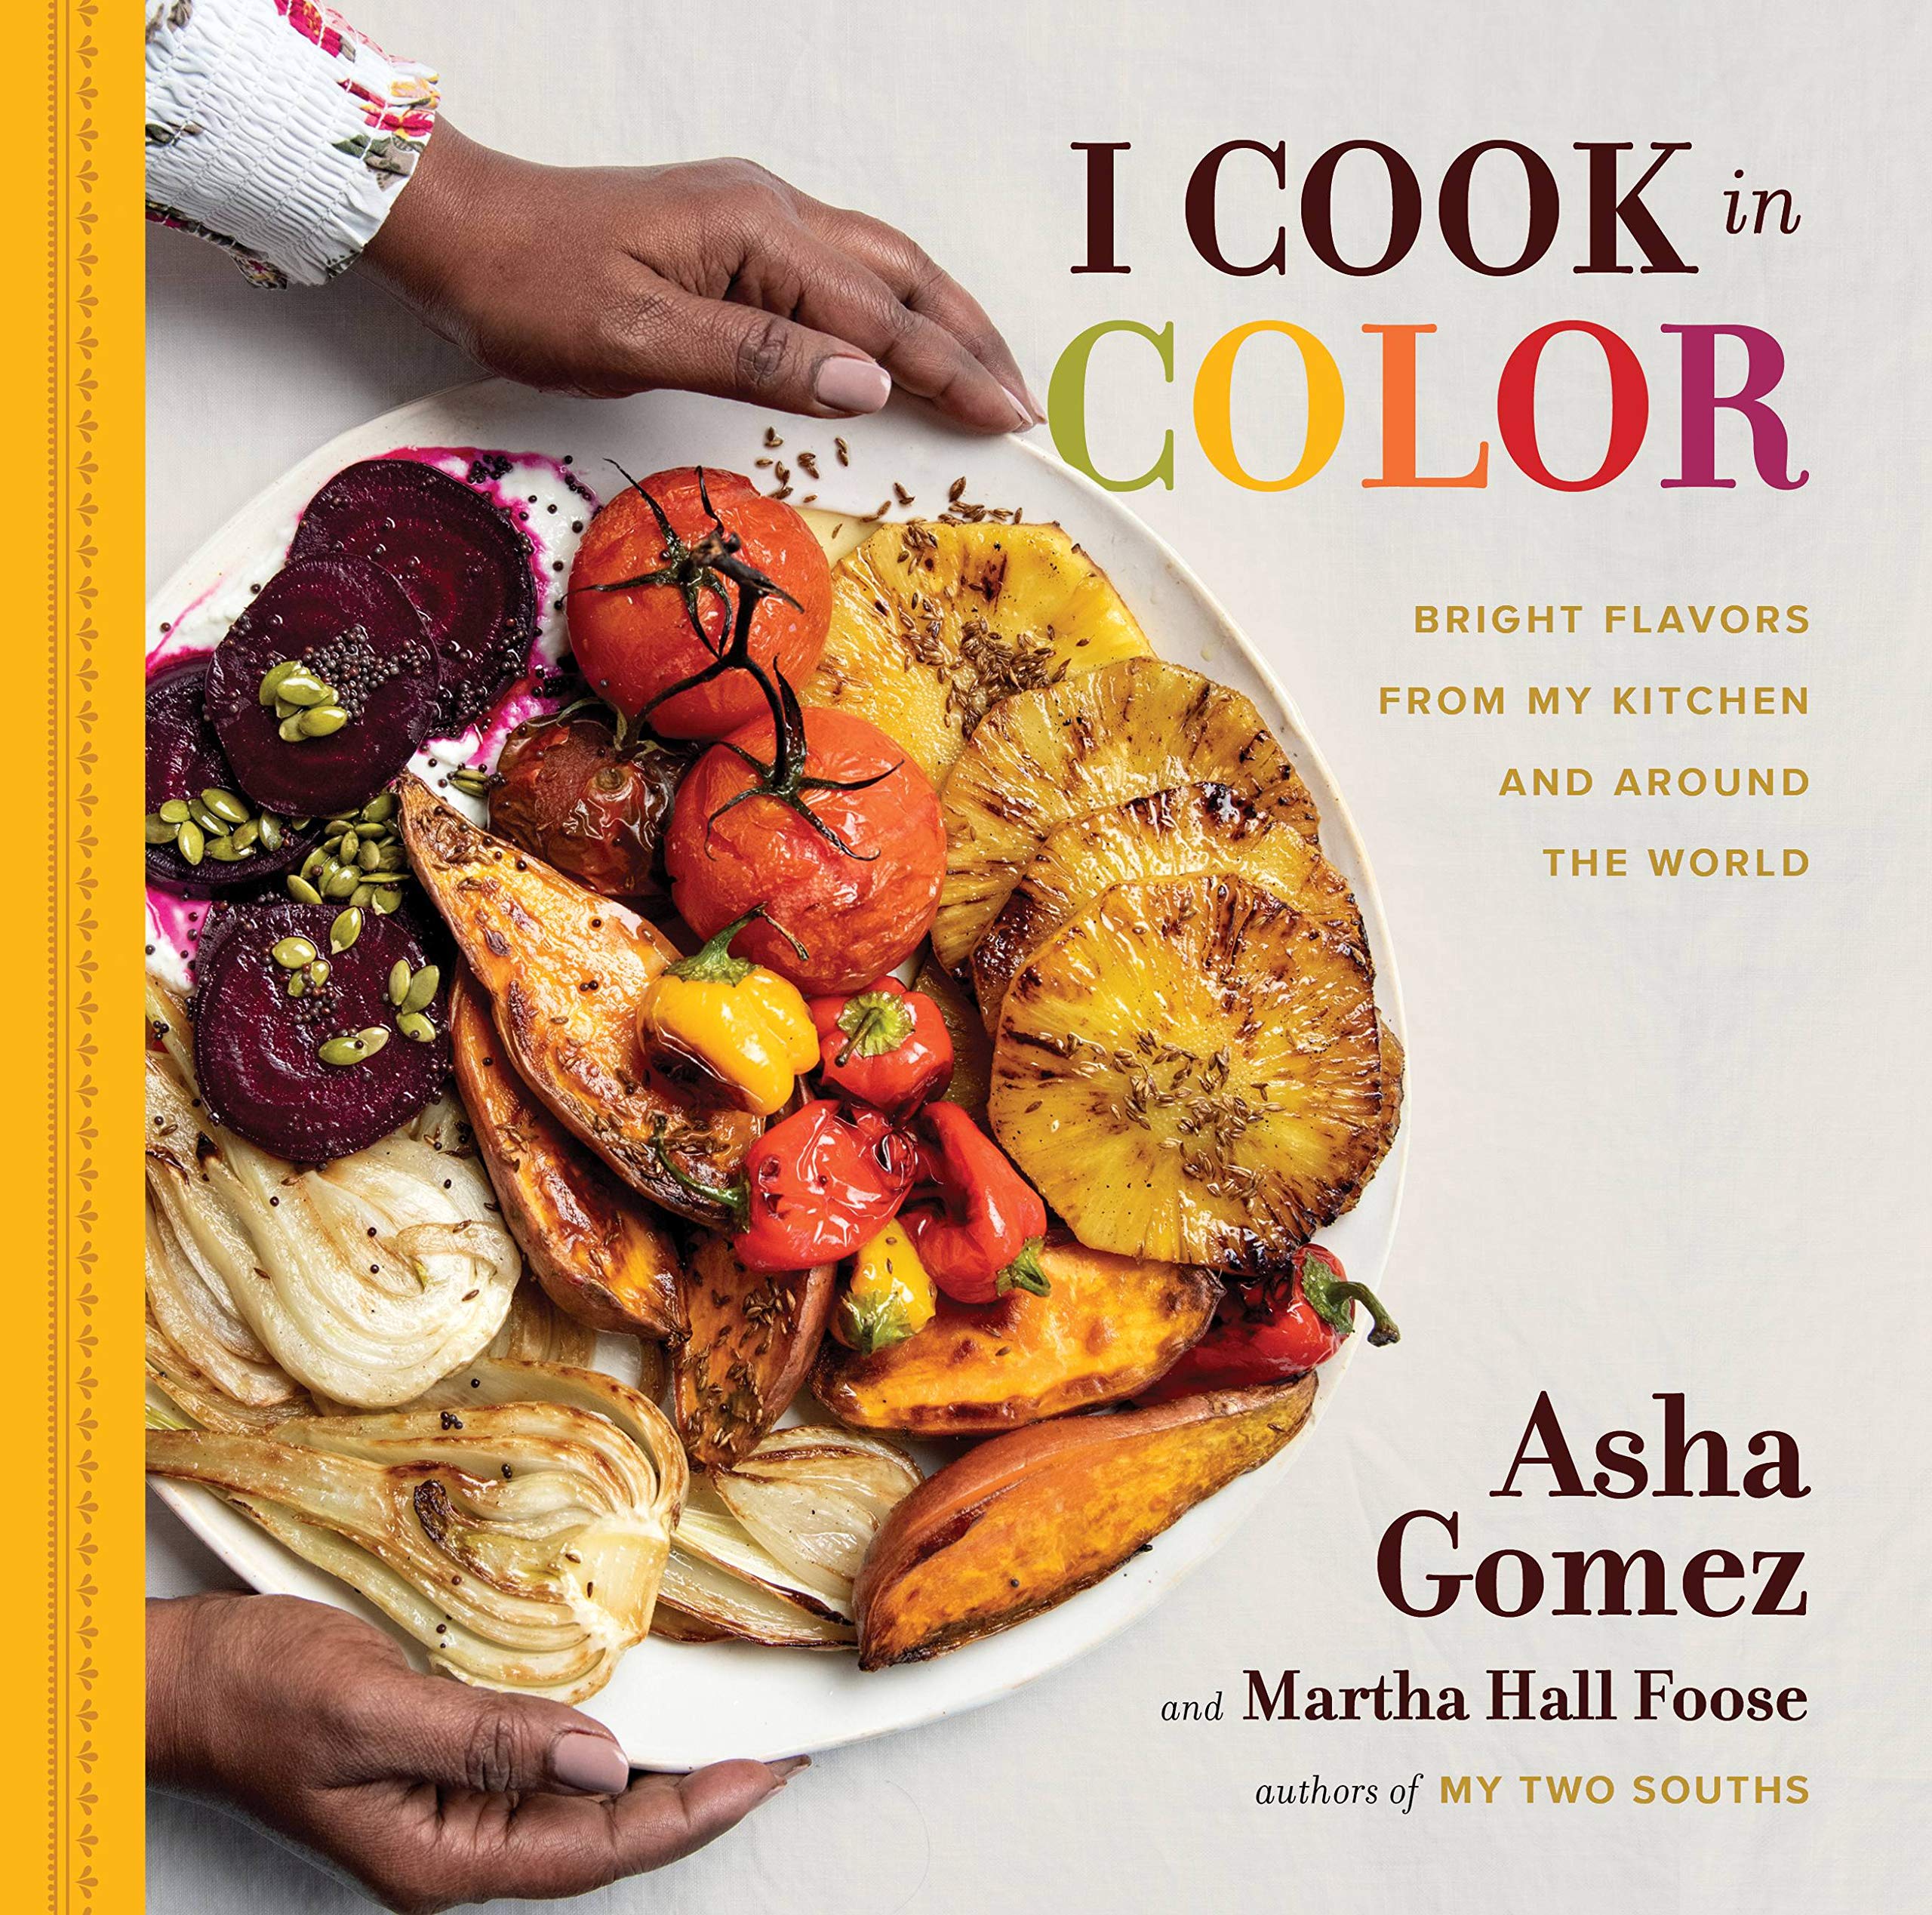 Image for "I Cook in Color"